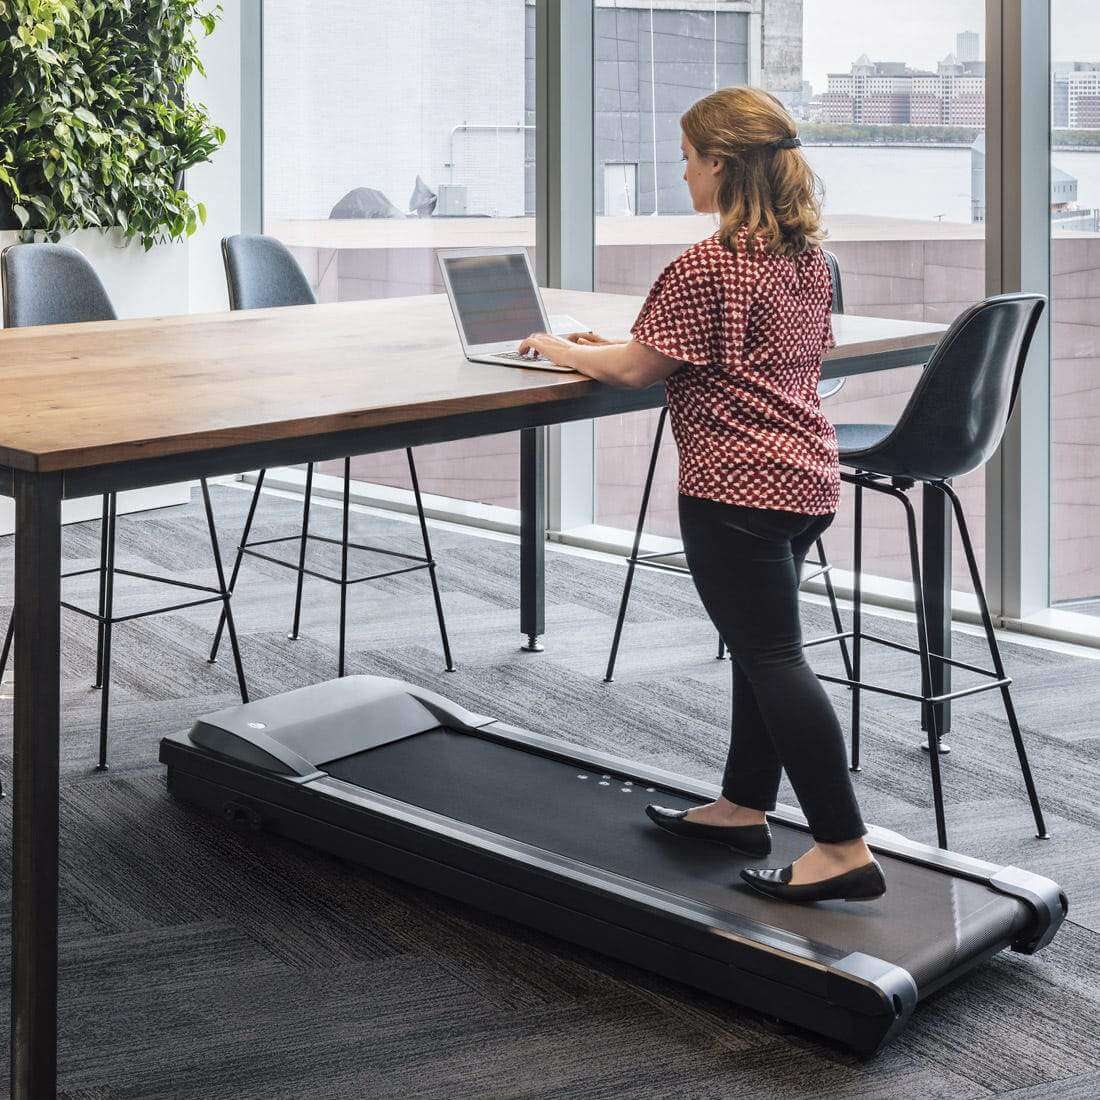 What Are the Benefits of Using Under Desk Treadmills?